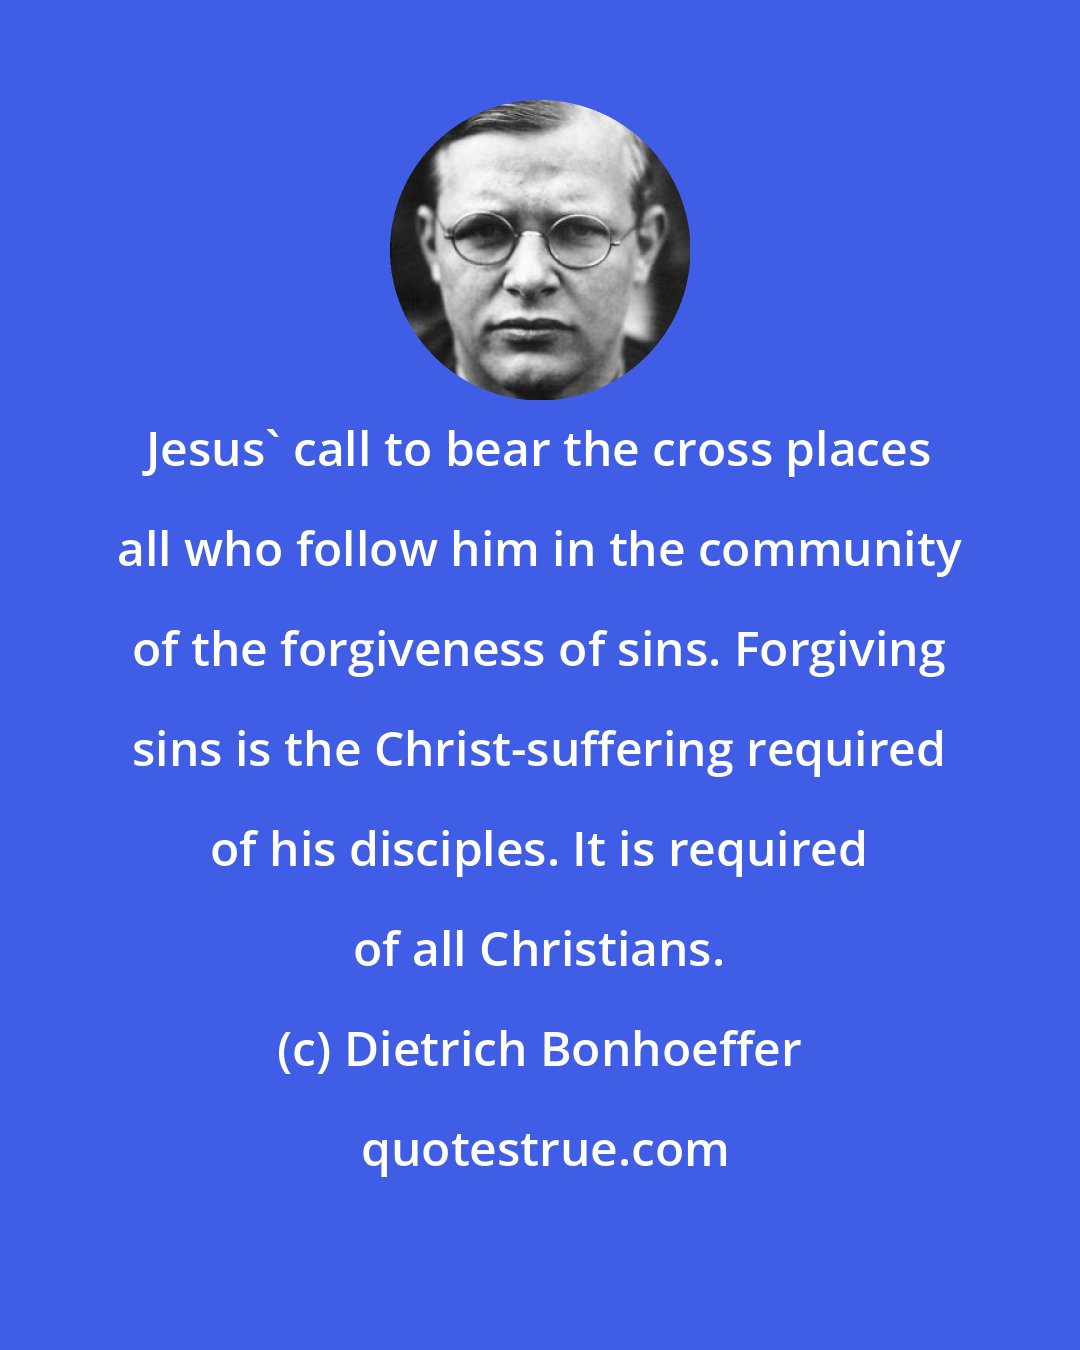 Dietrich Bonhoeffer: Jesus' call to bear the cross places all who follow him in the community of the forgiveness of sins. Forgiving sins is the Christ-suffering required of his disciples. It is required of all Christians.